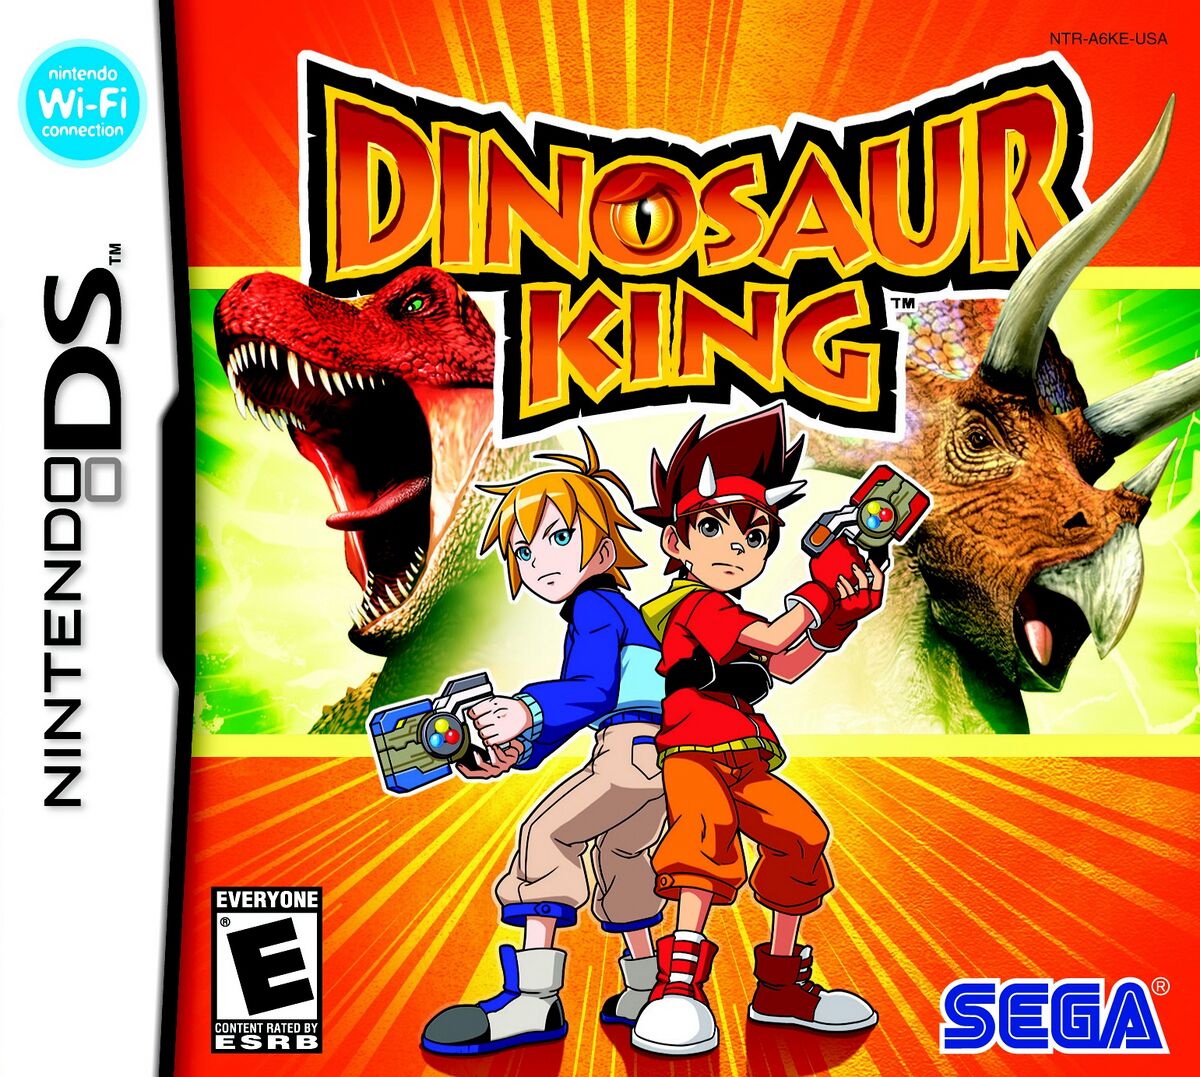 dinosaur-king-strategywiki-the-video-game-walkthrough-and-strategy-guide-wiki